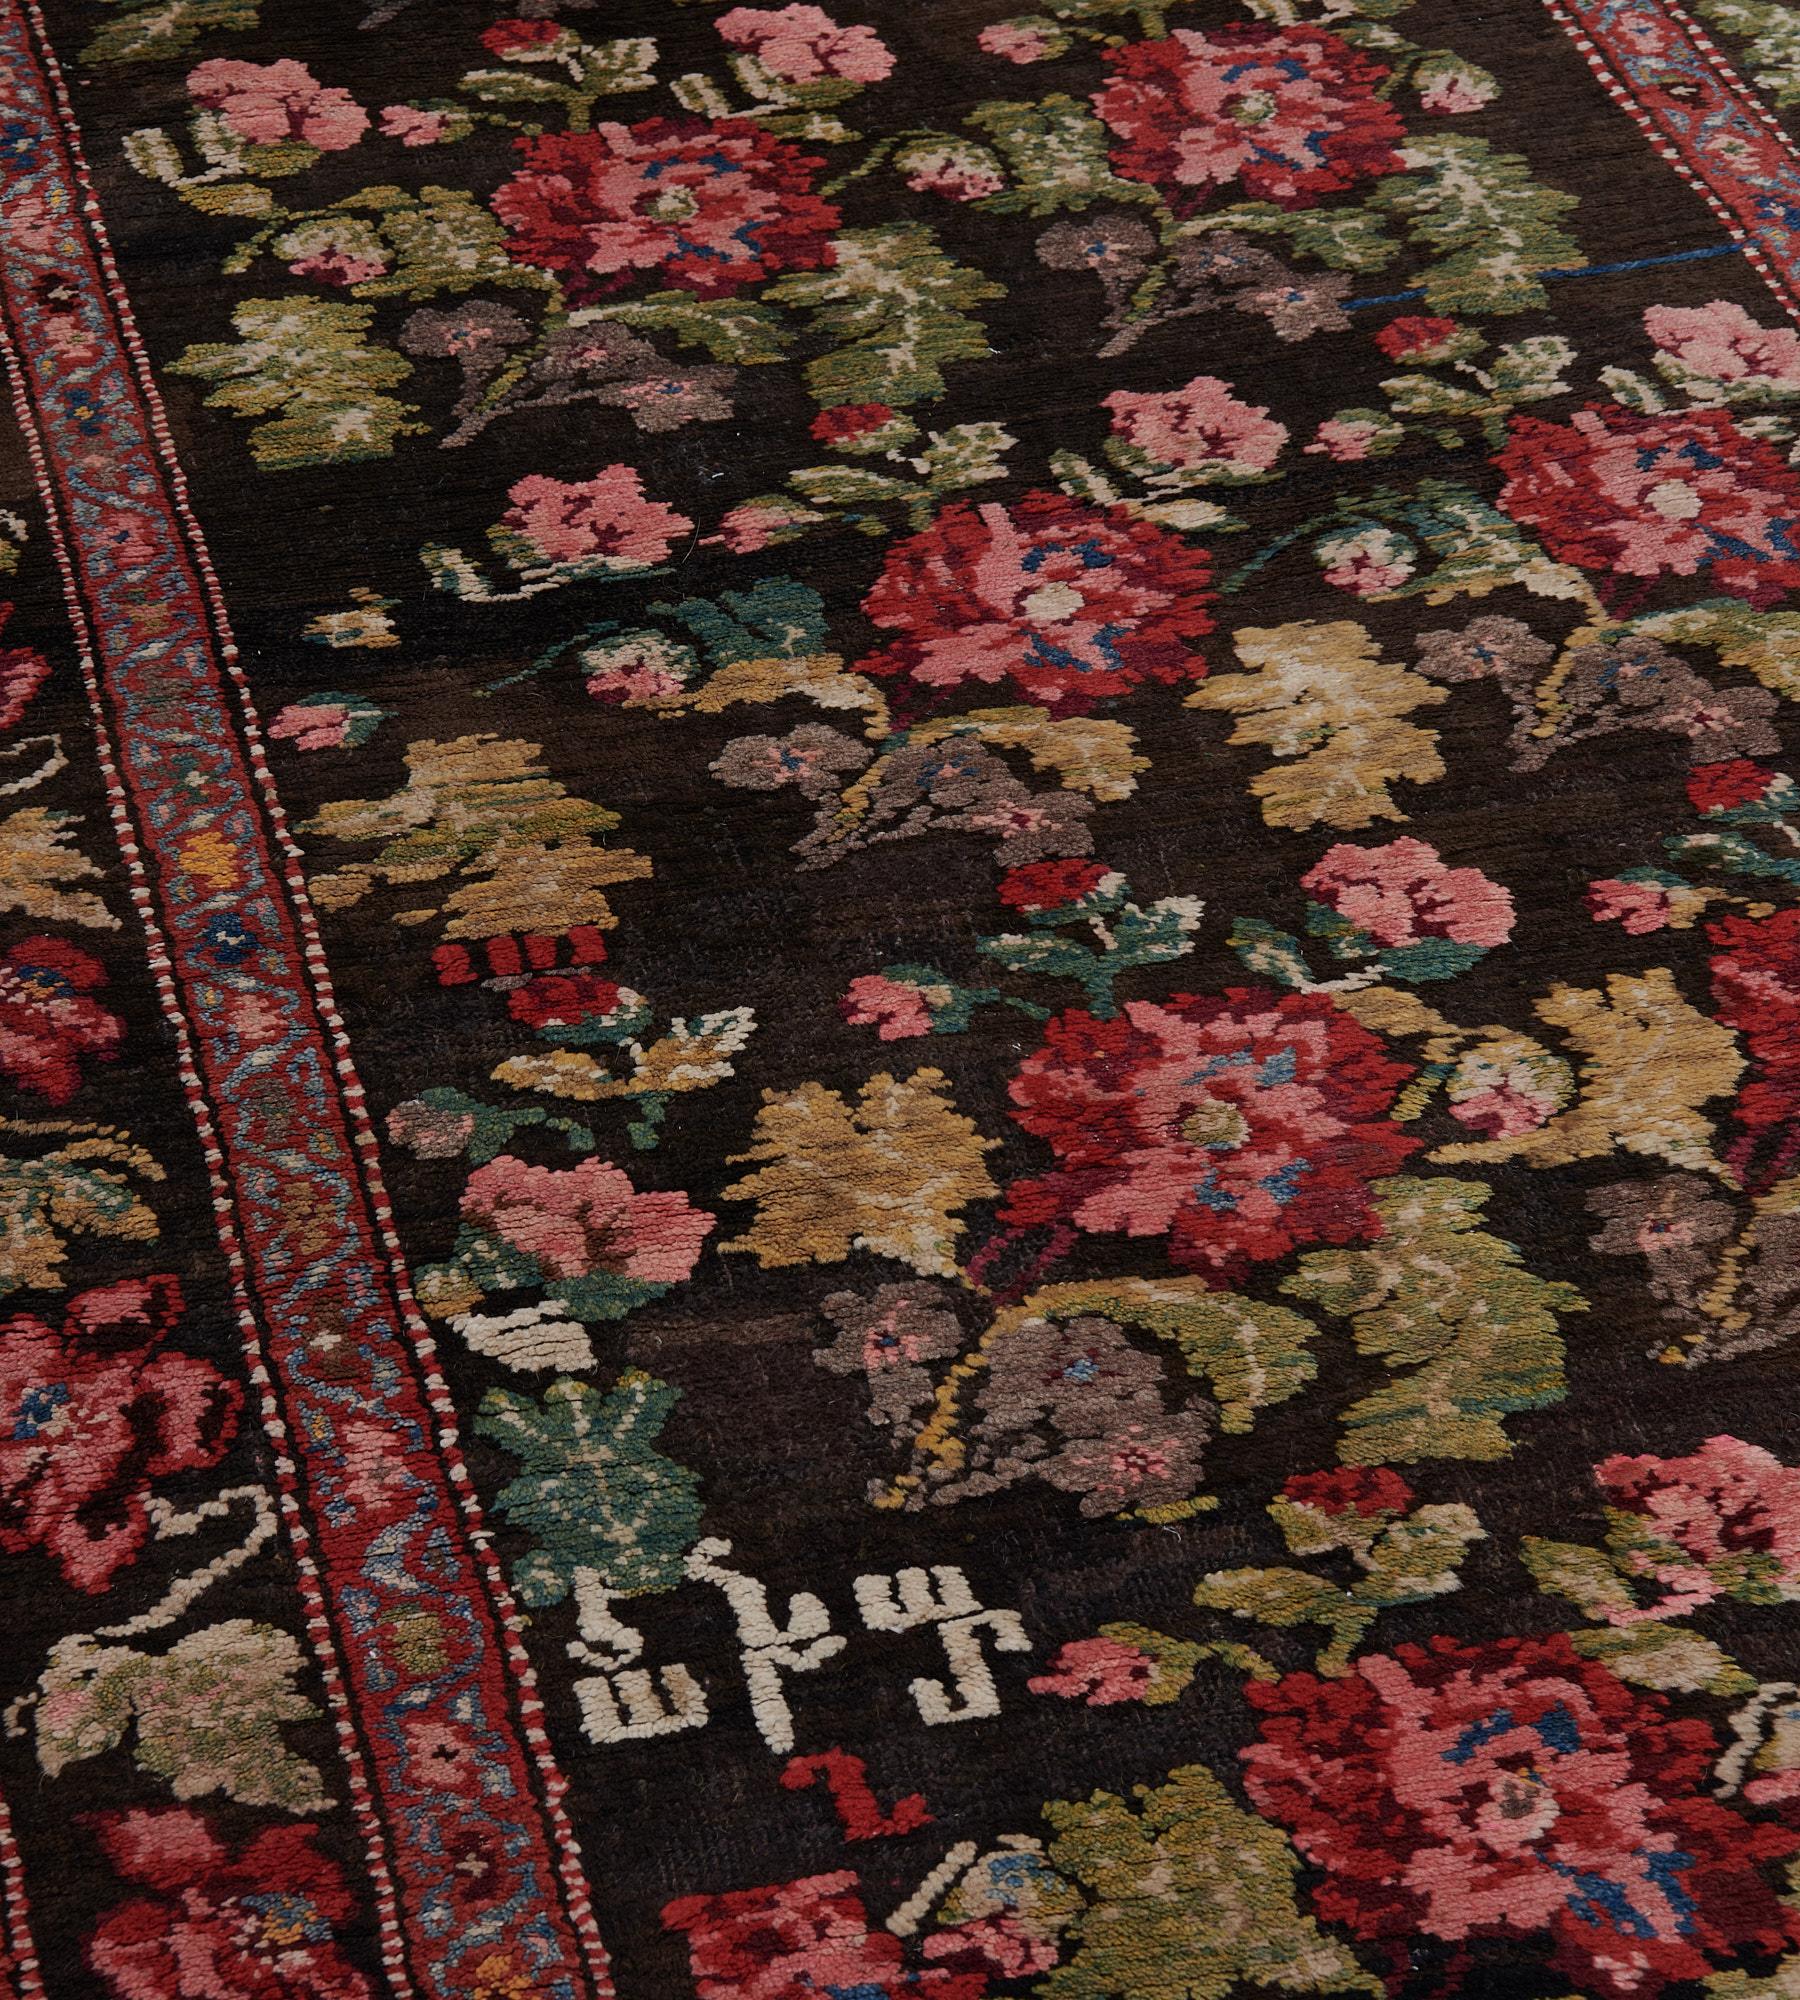 This antique Karabagh rug has a charcoal-black field with an overall design of cherry-red and dusty-pink floral bouquets with moss-green leaf and surrounded by similar smaller roses, an inscription band at one end and further letters to the lower